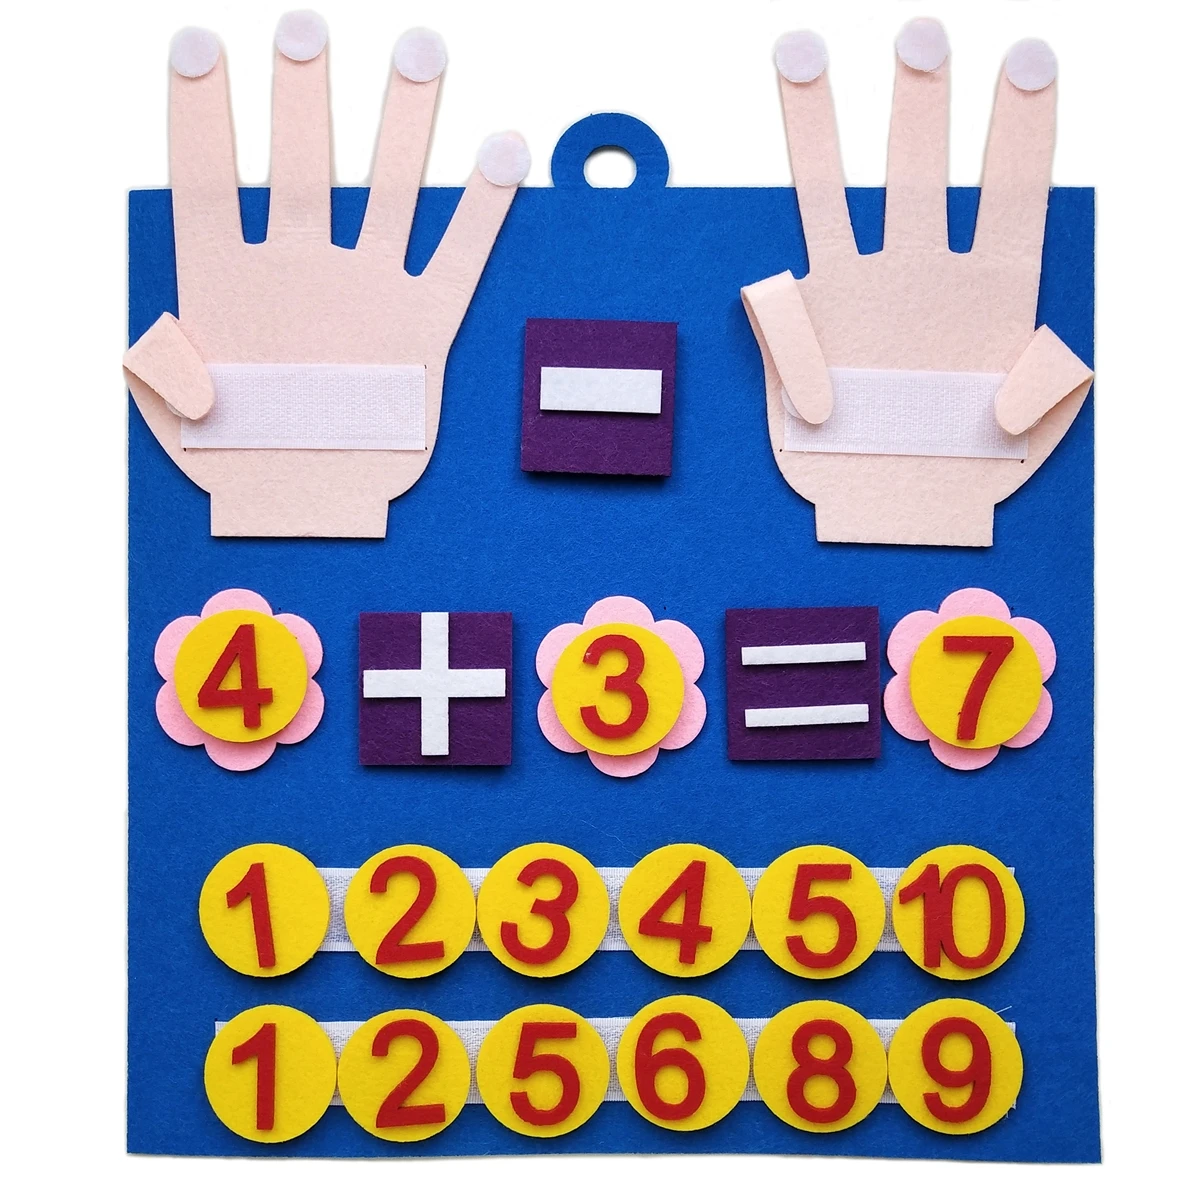 Kid Montessori Toys Felt Finger Numbers Math Toy Children Counting Early Learning For Toddlers Intelligence Develop 30*30cm